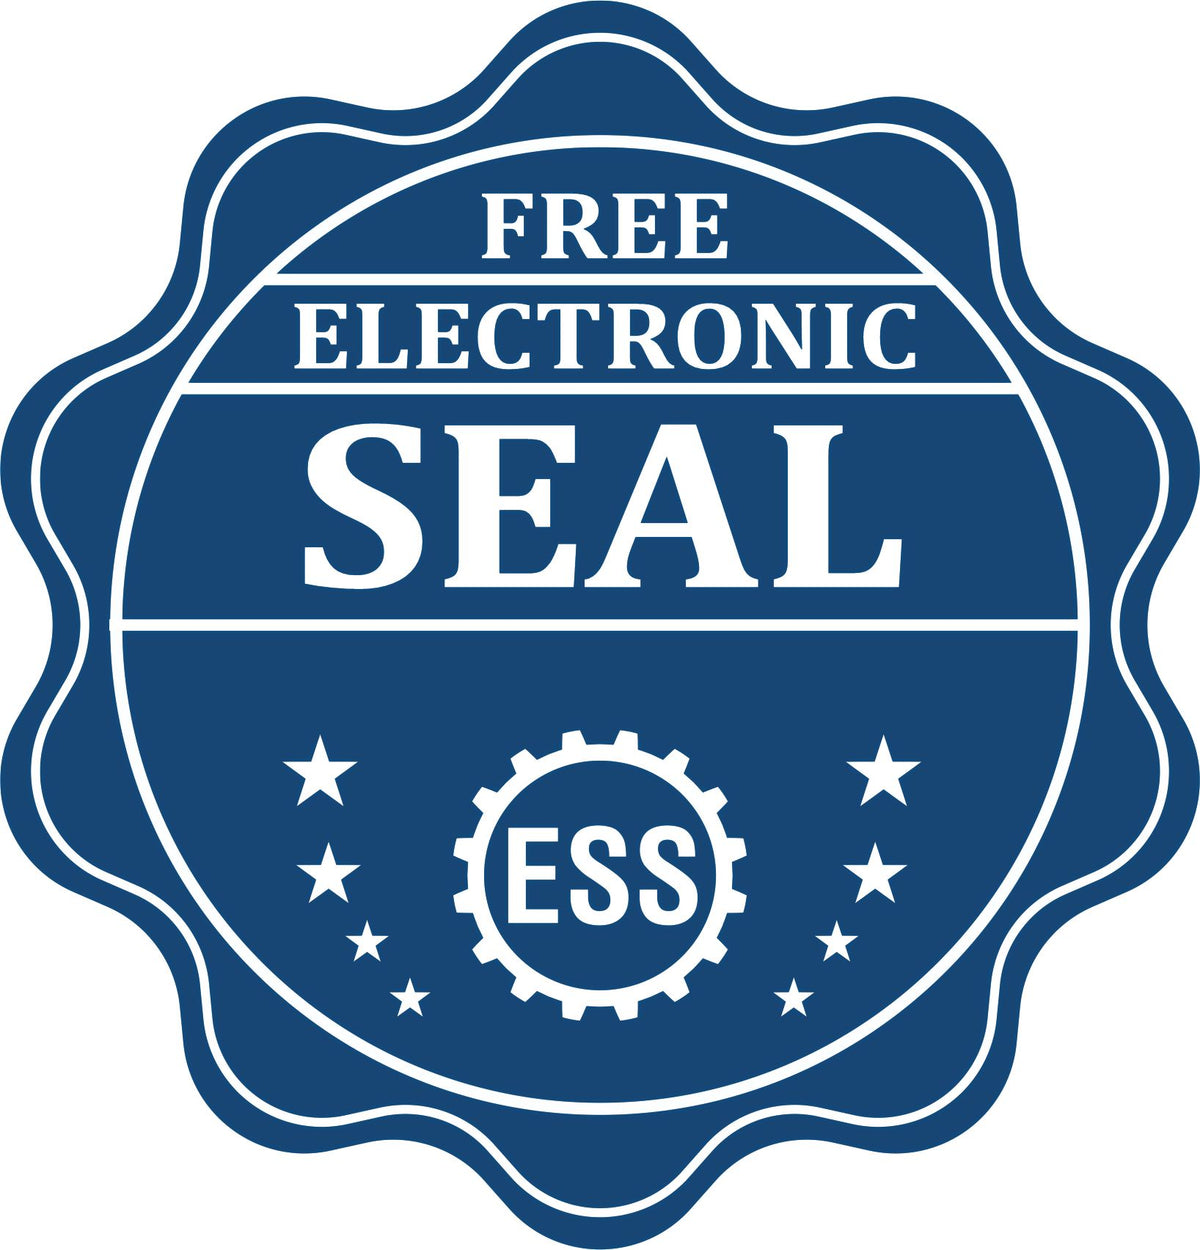 A badge showing a free electronic seal for the Handheld District of Columbia Professional Engineer Embosser with stars and the ESS gear on the emblem.